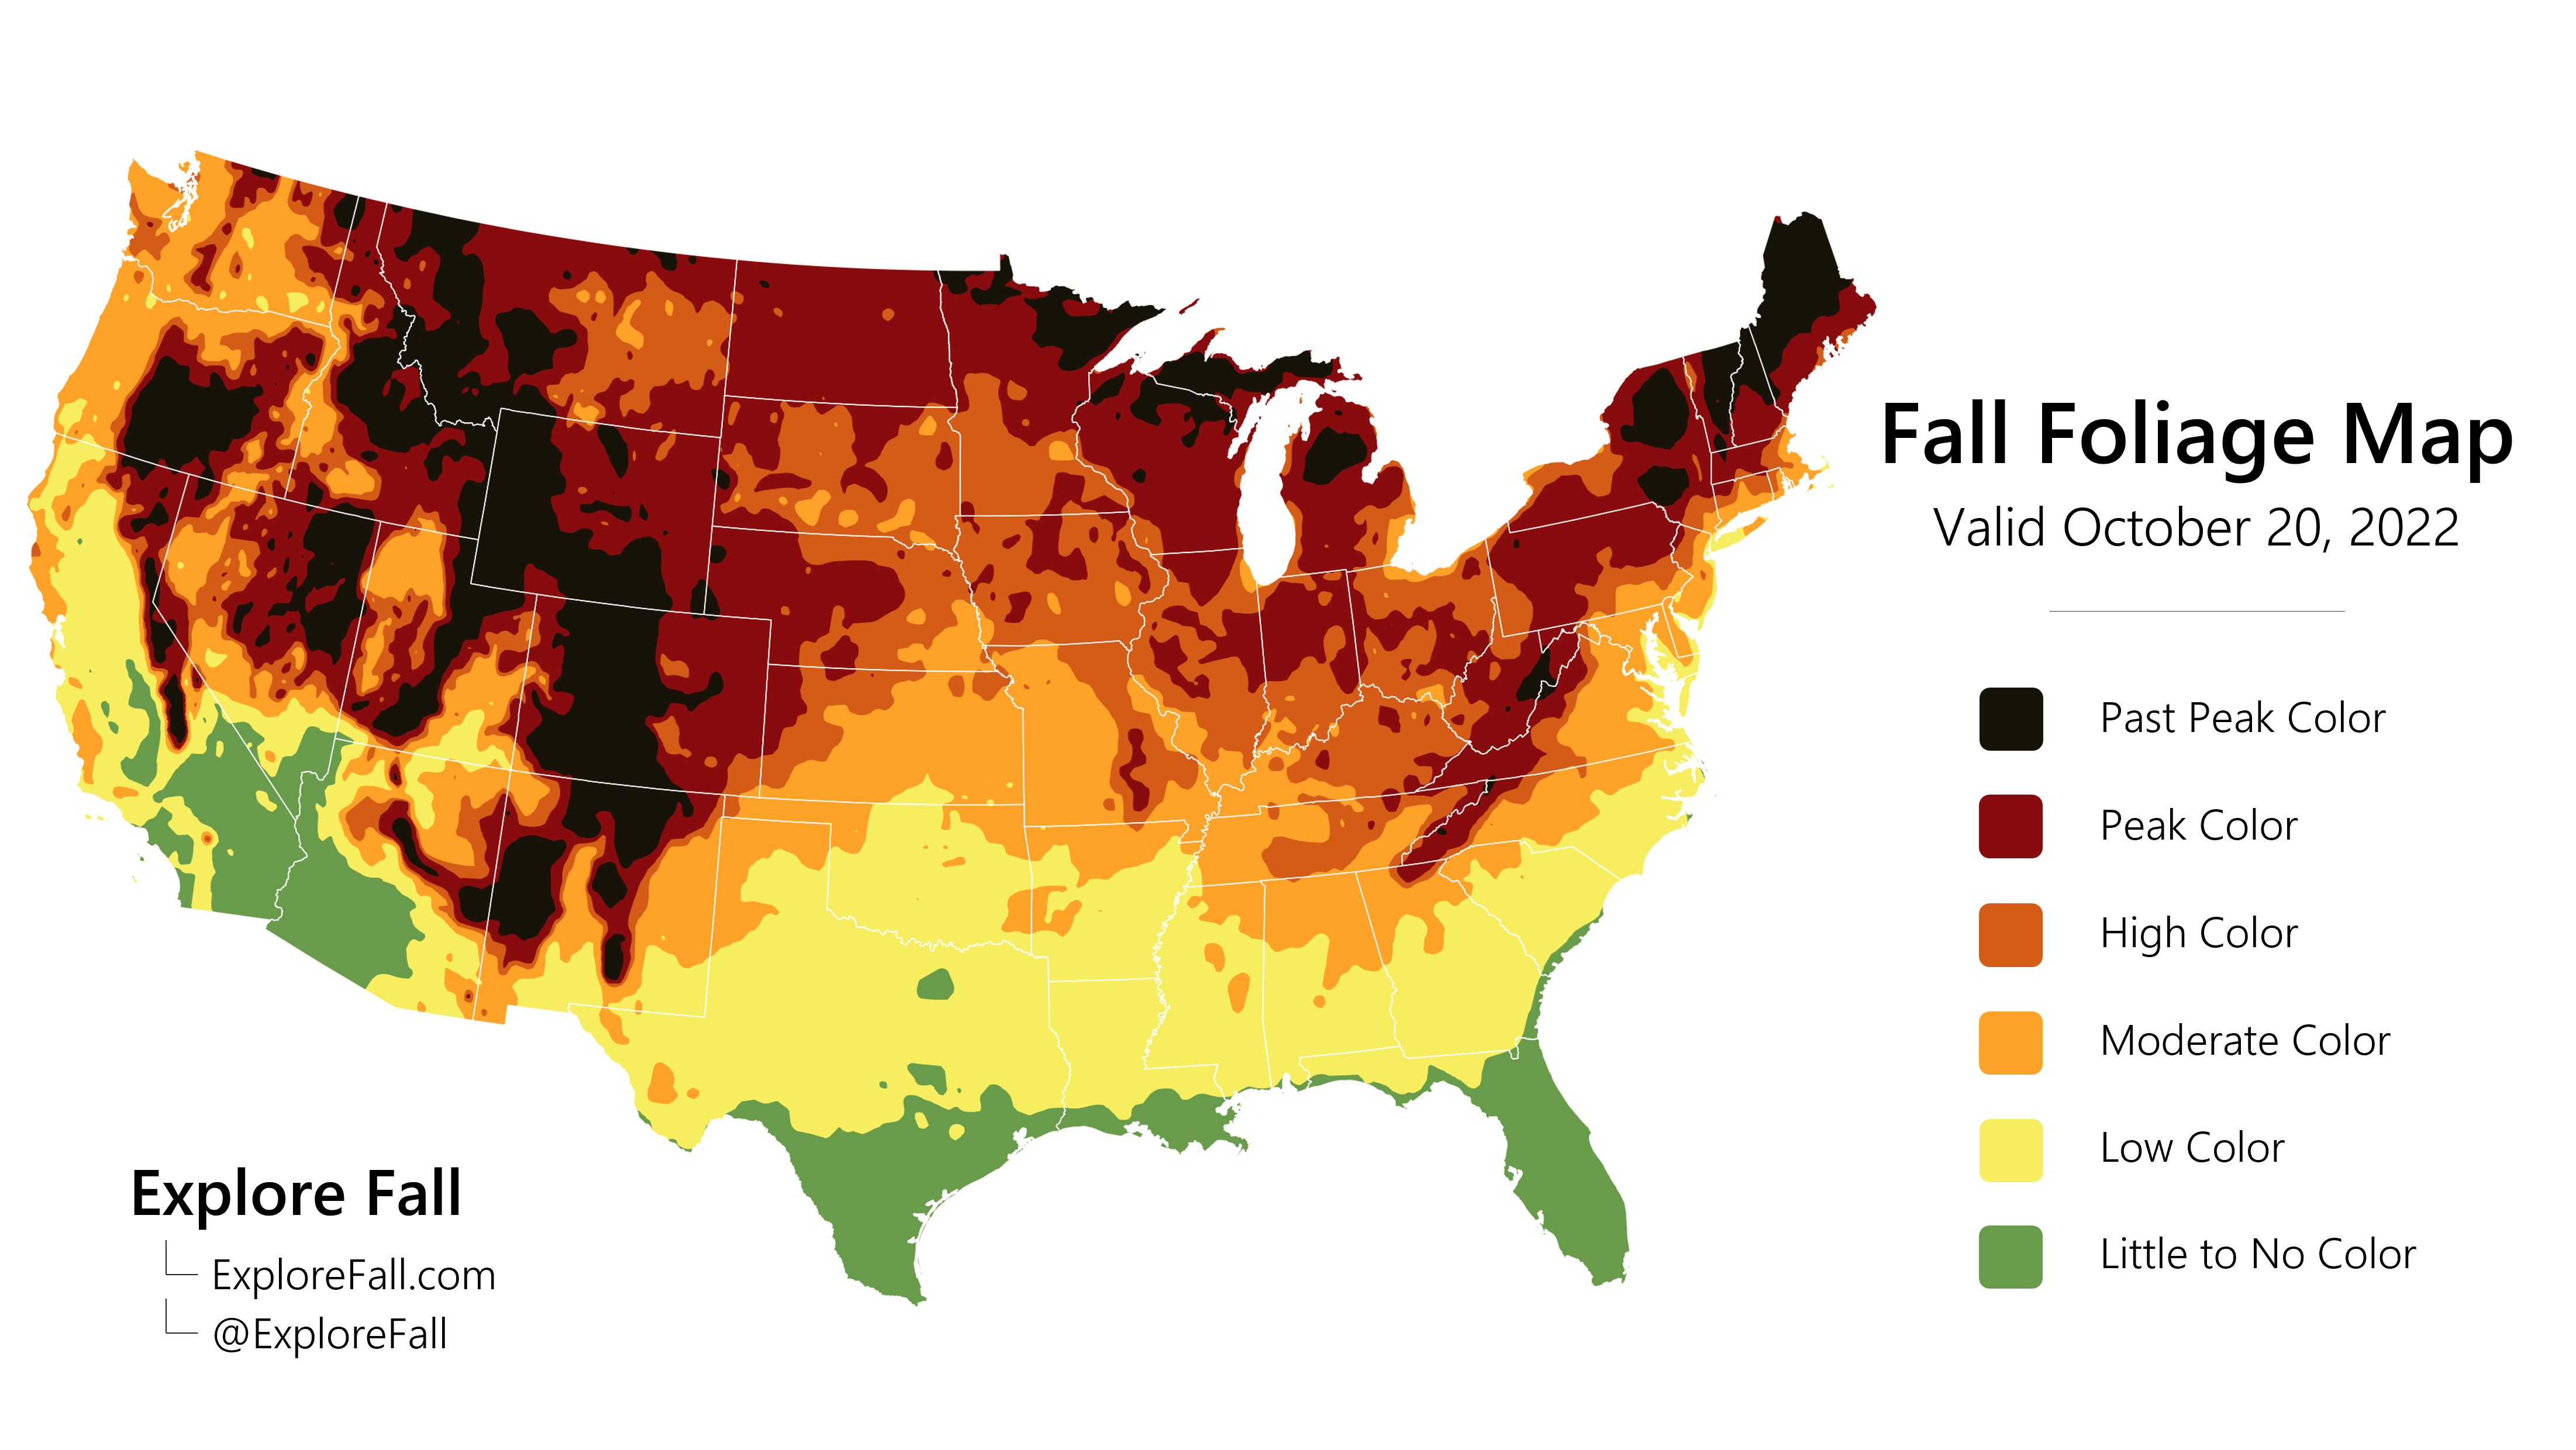 A map of fall foliage stress in the US for Fall 2023